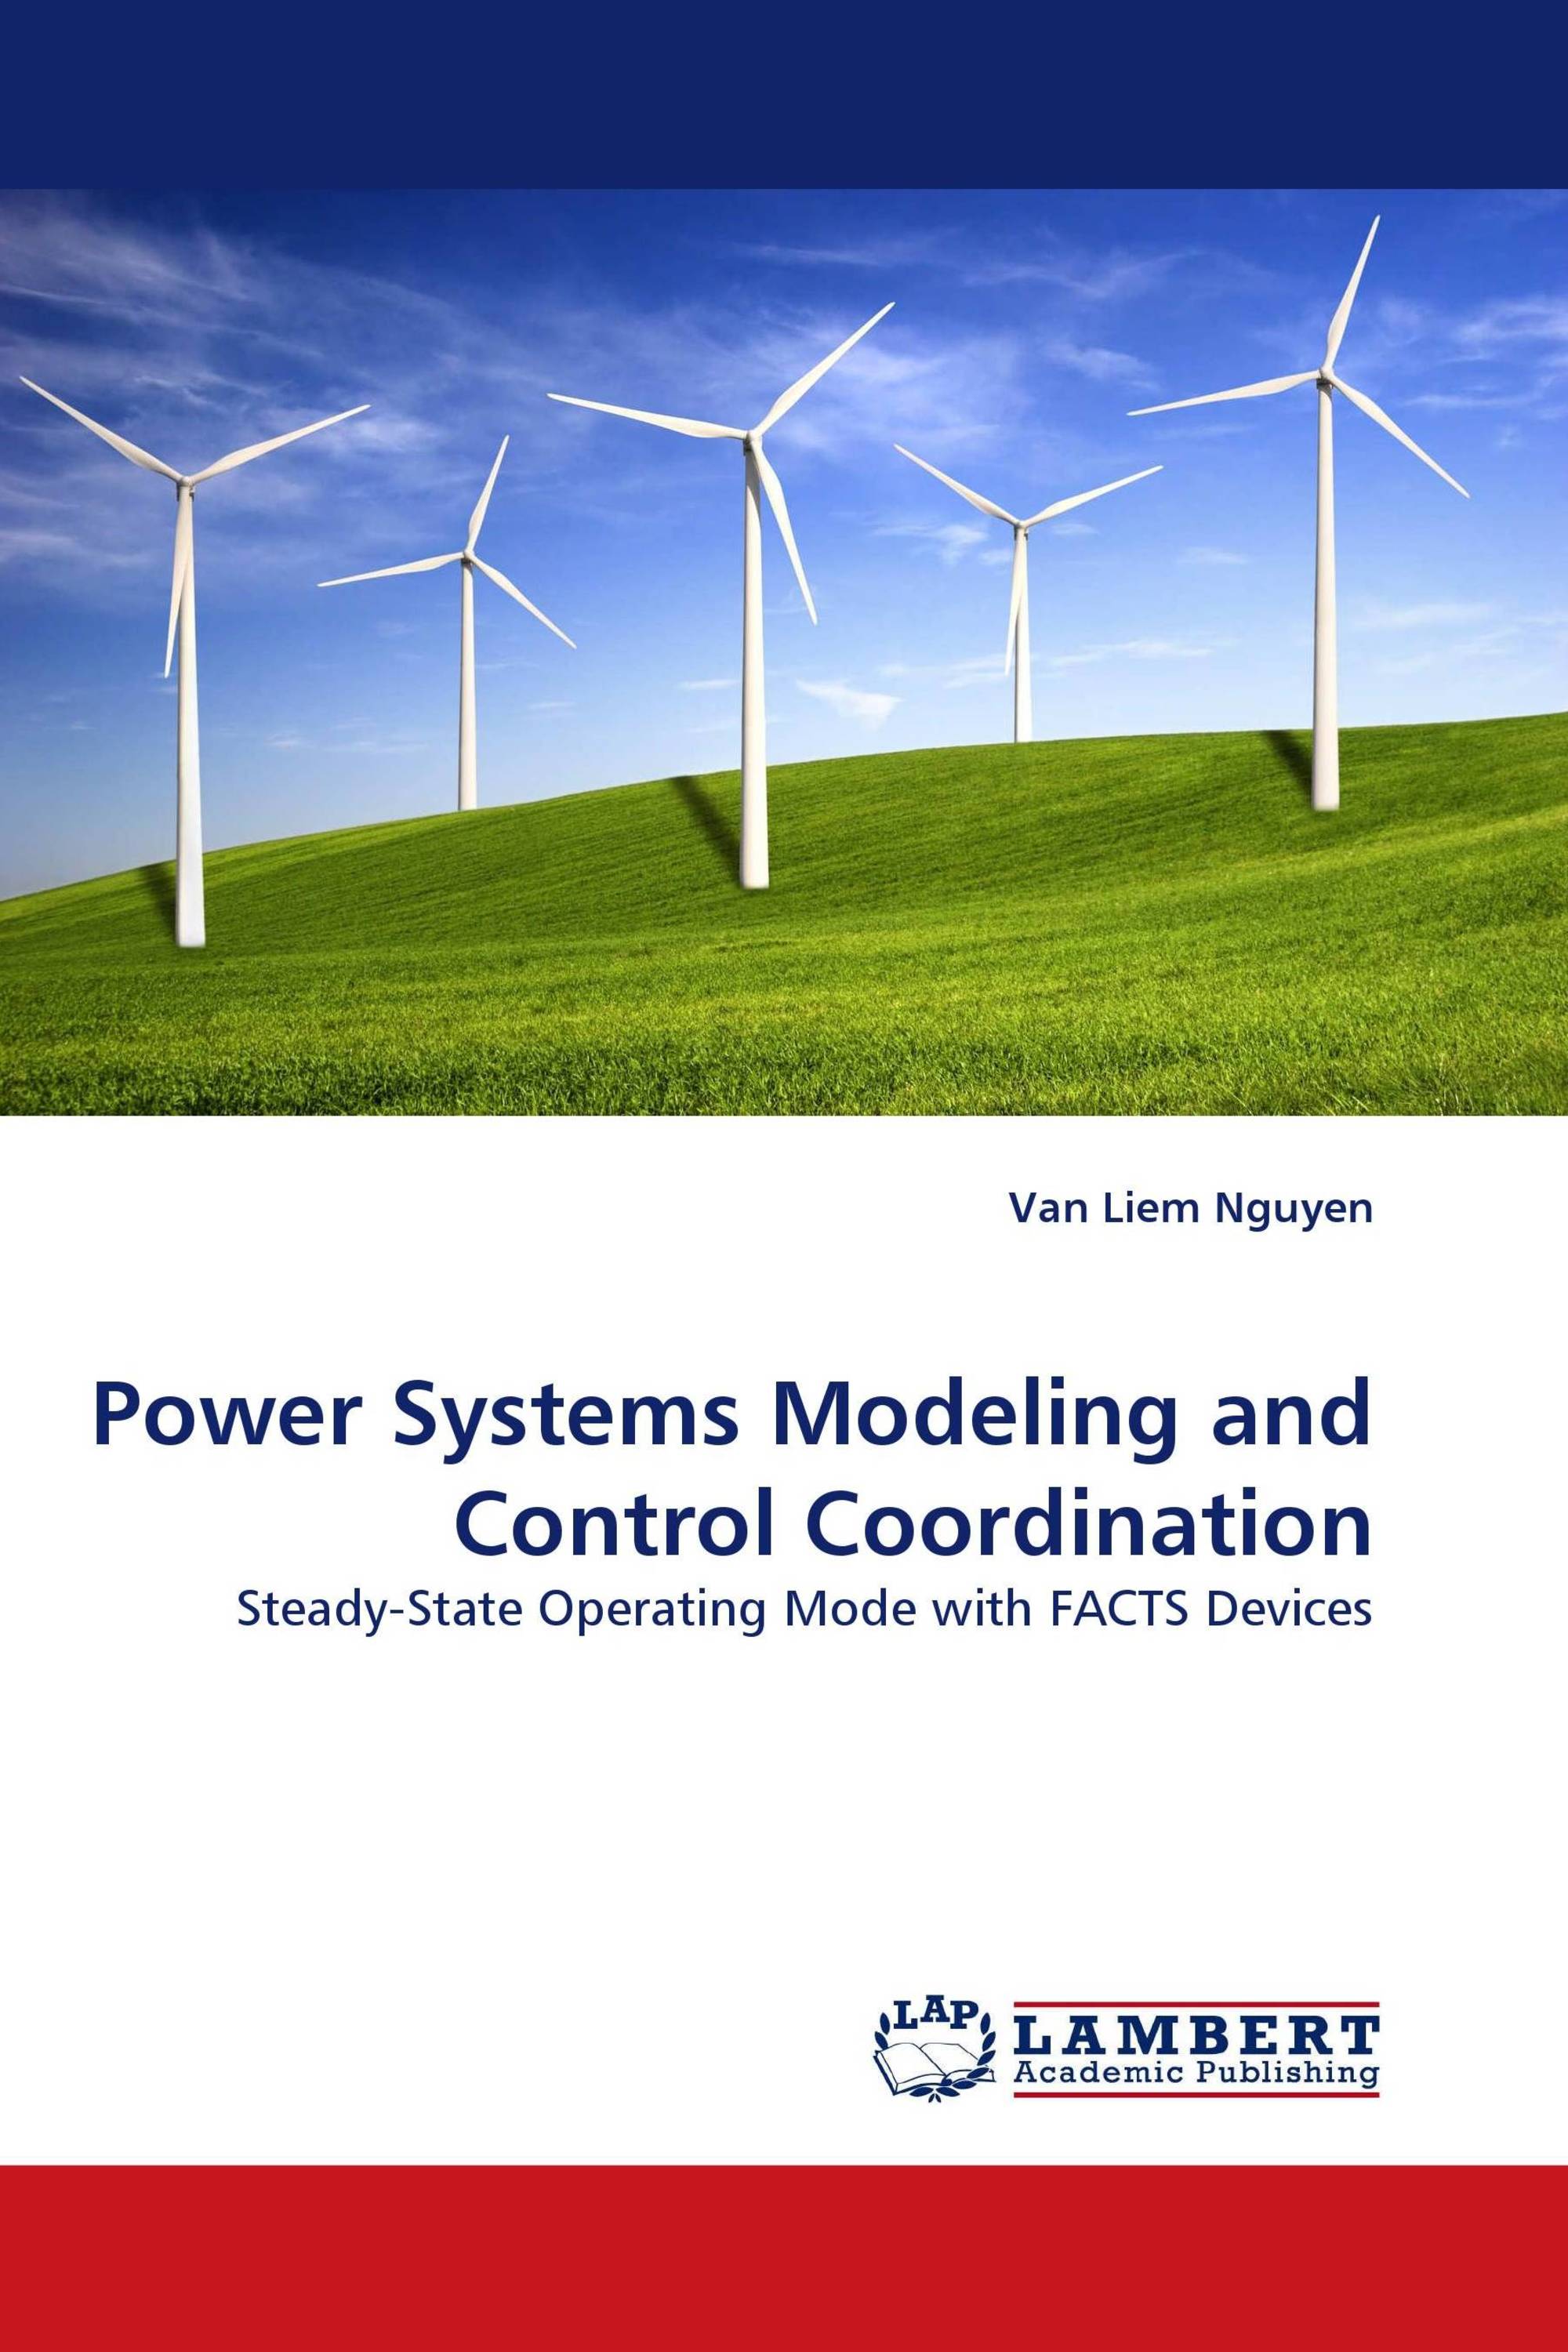 Power Systems Modeling and Control Coordination